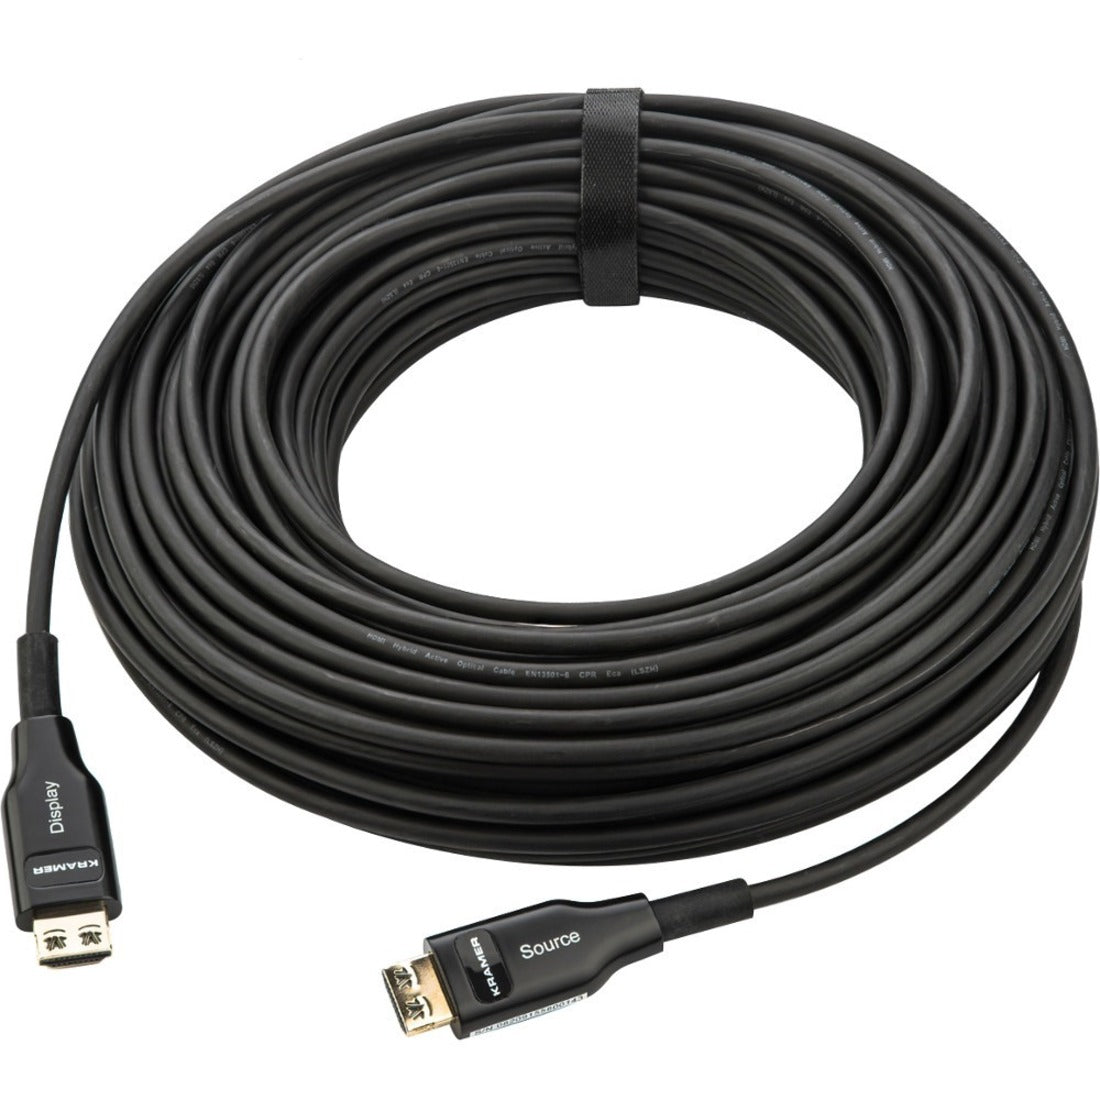 Kramer CP-AOCH/60F-66 High-Speed HDMI Cable - Plenum Rated, 66 ft, EMI/RF Protection, HDR Support